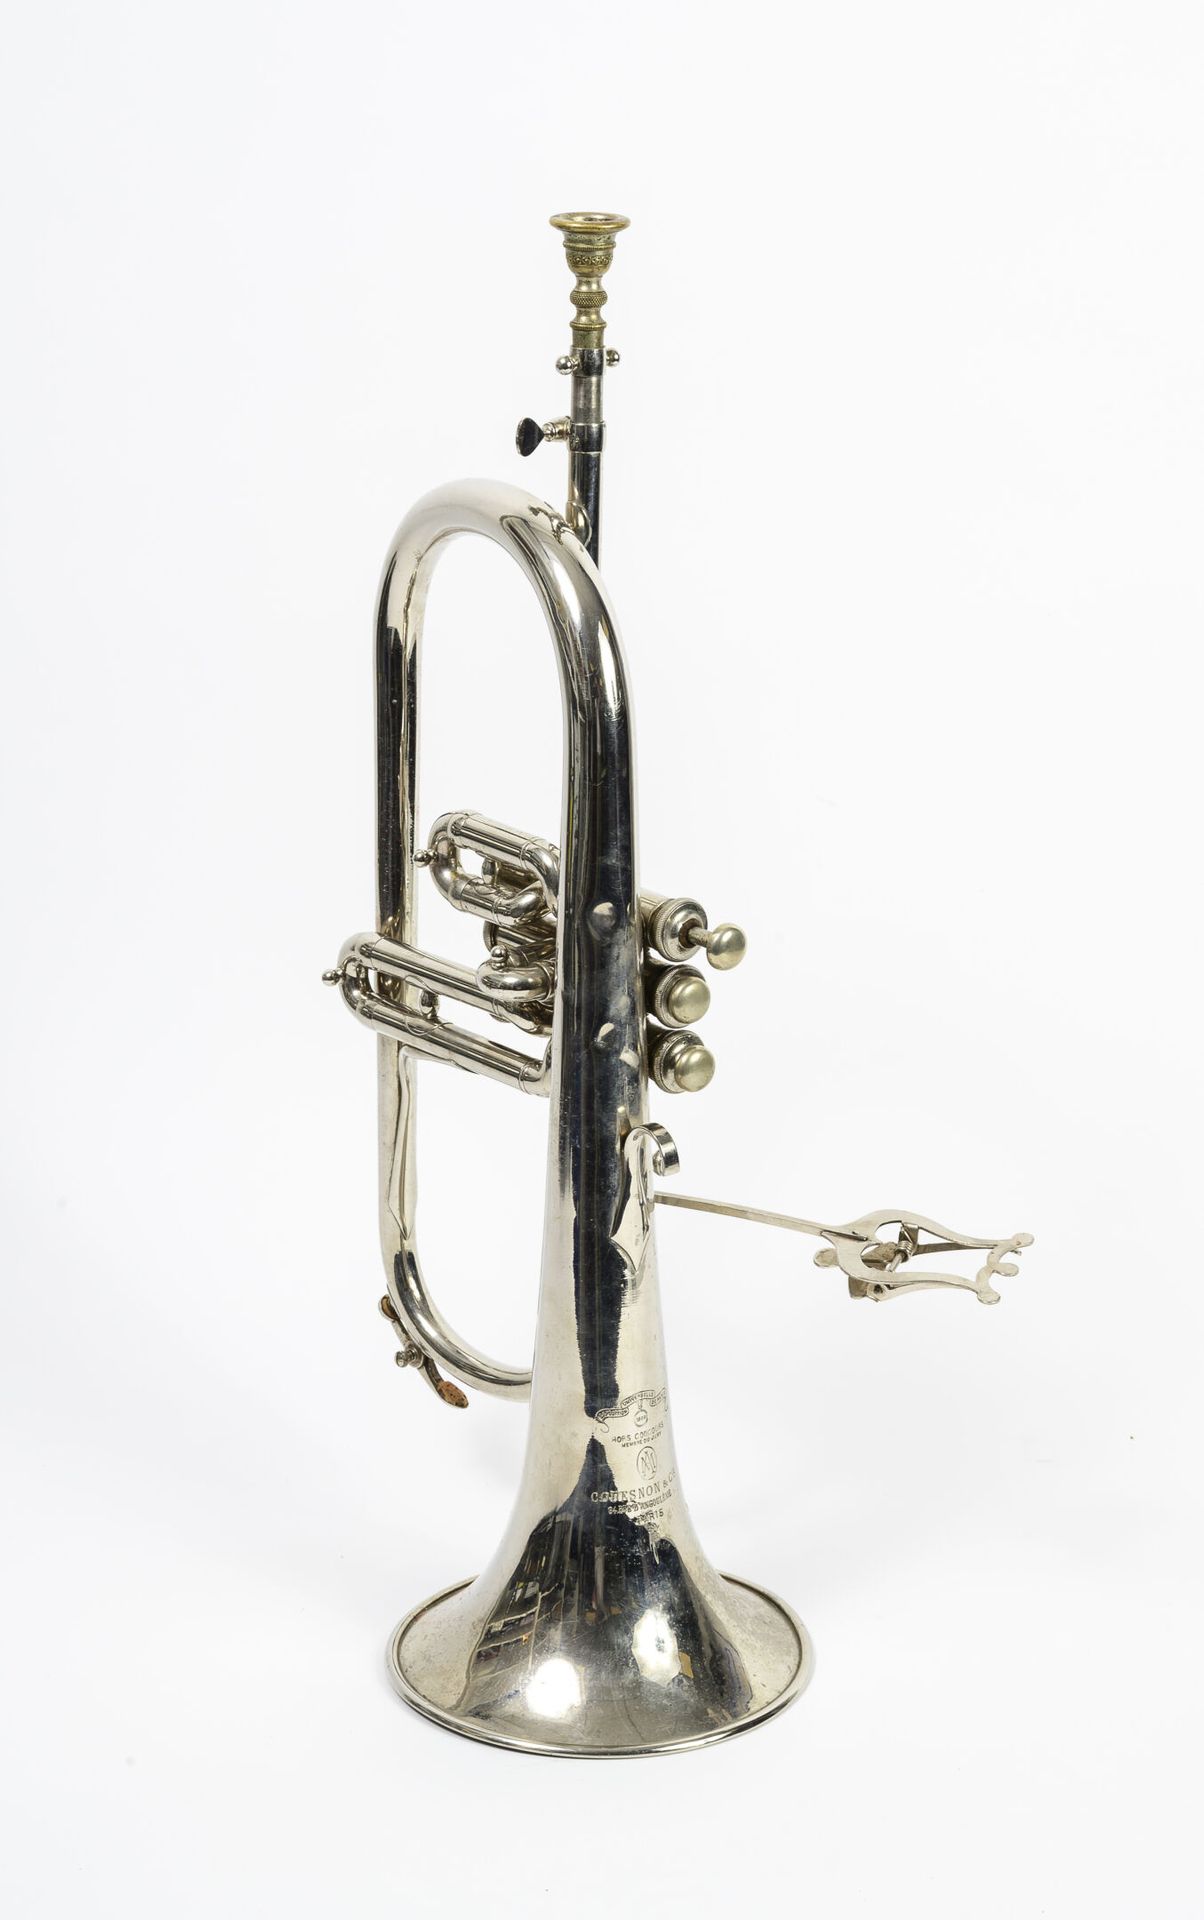 COVESNON & Cie Metal trumpet with its score holder. 

Shocks.

In its case (wear&hellip;